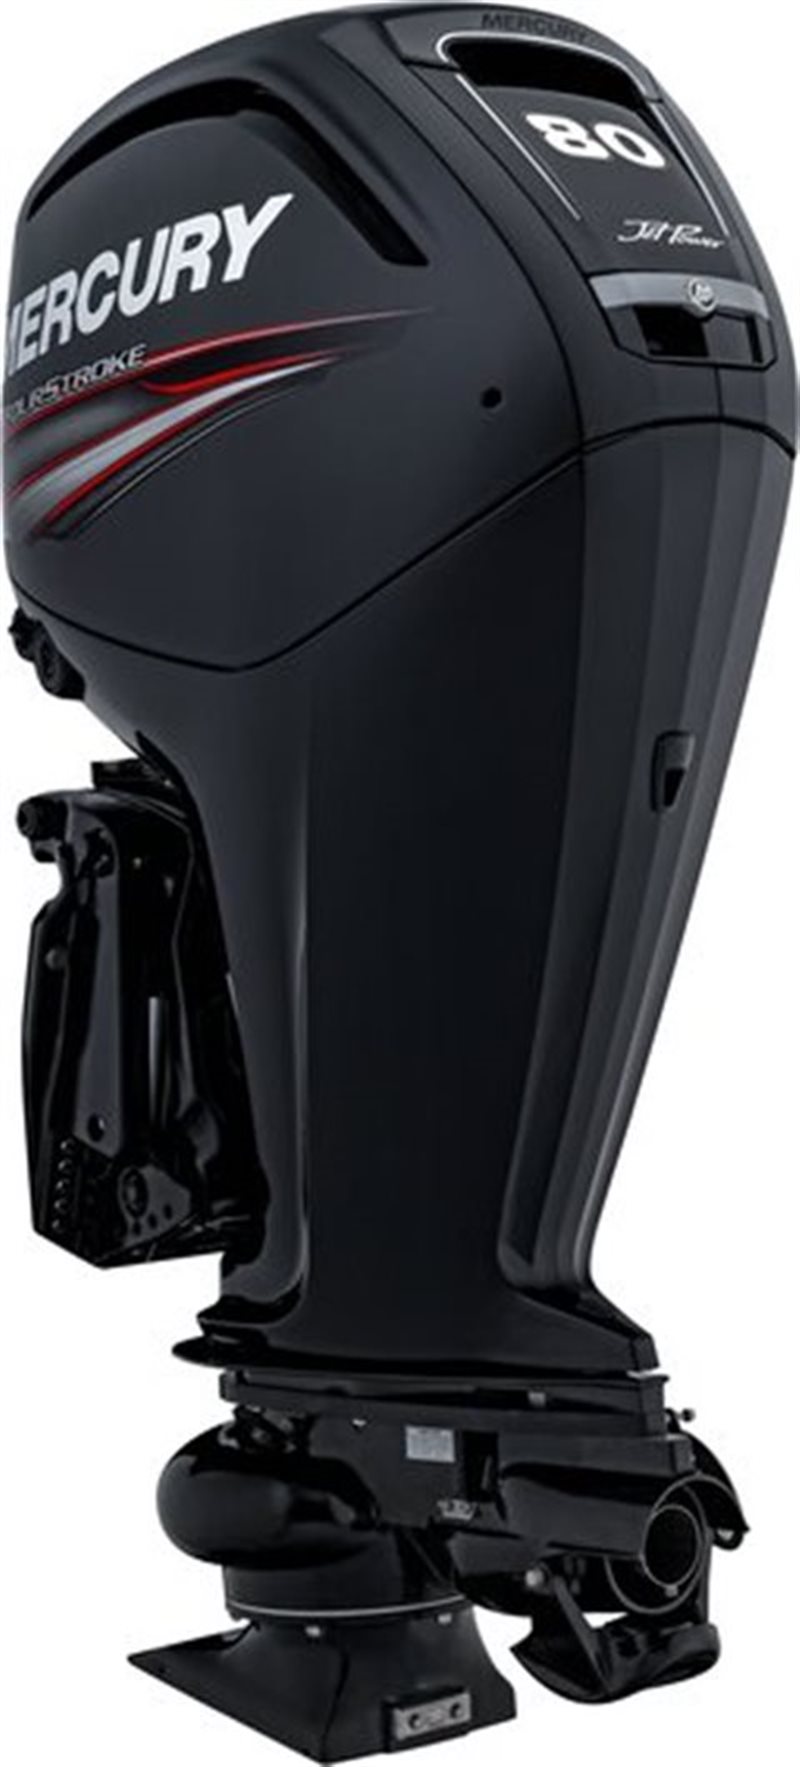 2021 Mercury Outboard FourStroke Jet Outboards 25-80 hp 80 hp Jet FourStroke at DT Powersports & Marine